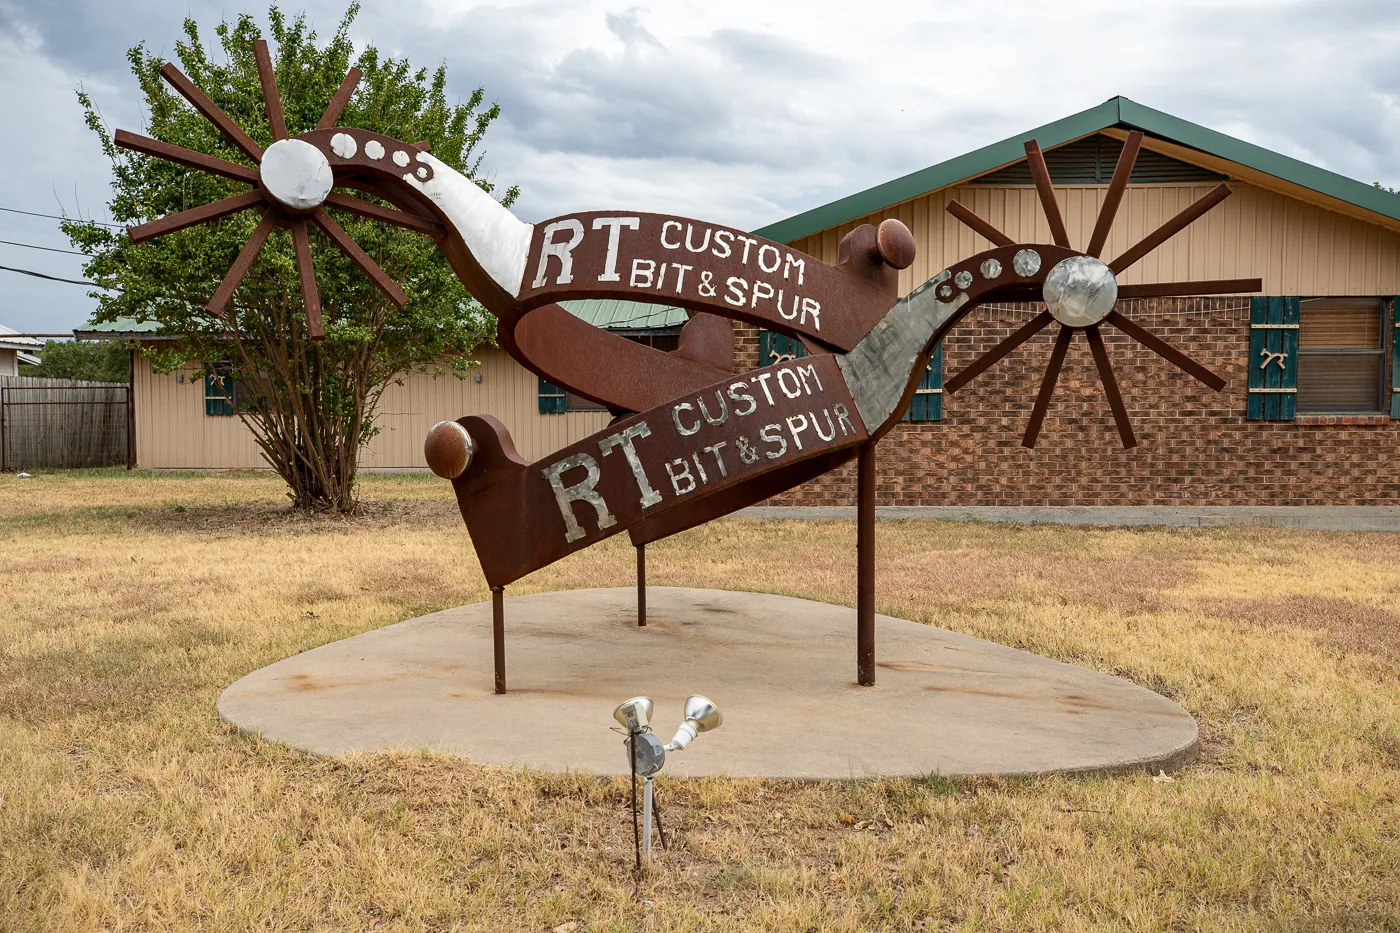 Big Spurs in Gainesville, Texas roadside attraction